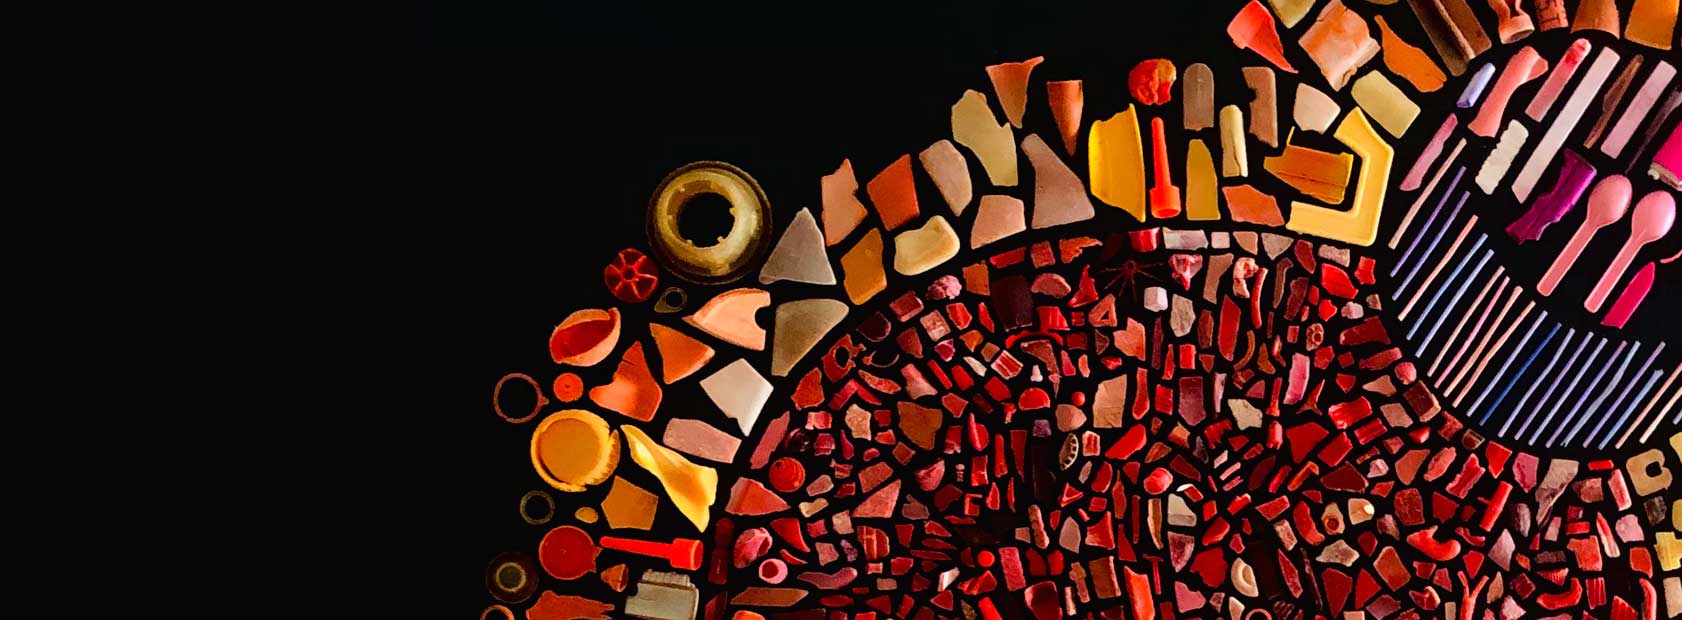 mosaic art made from recycled plastic items